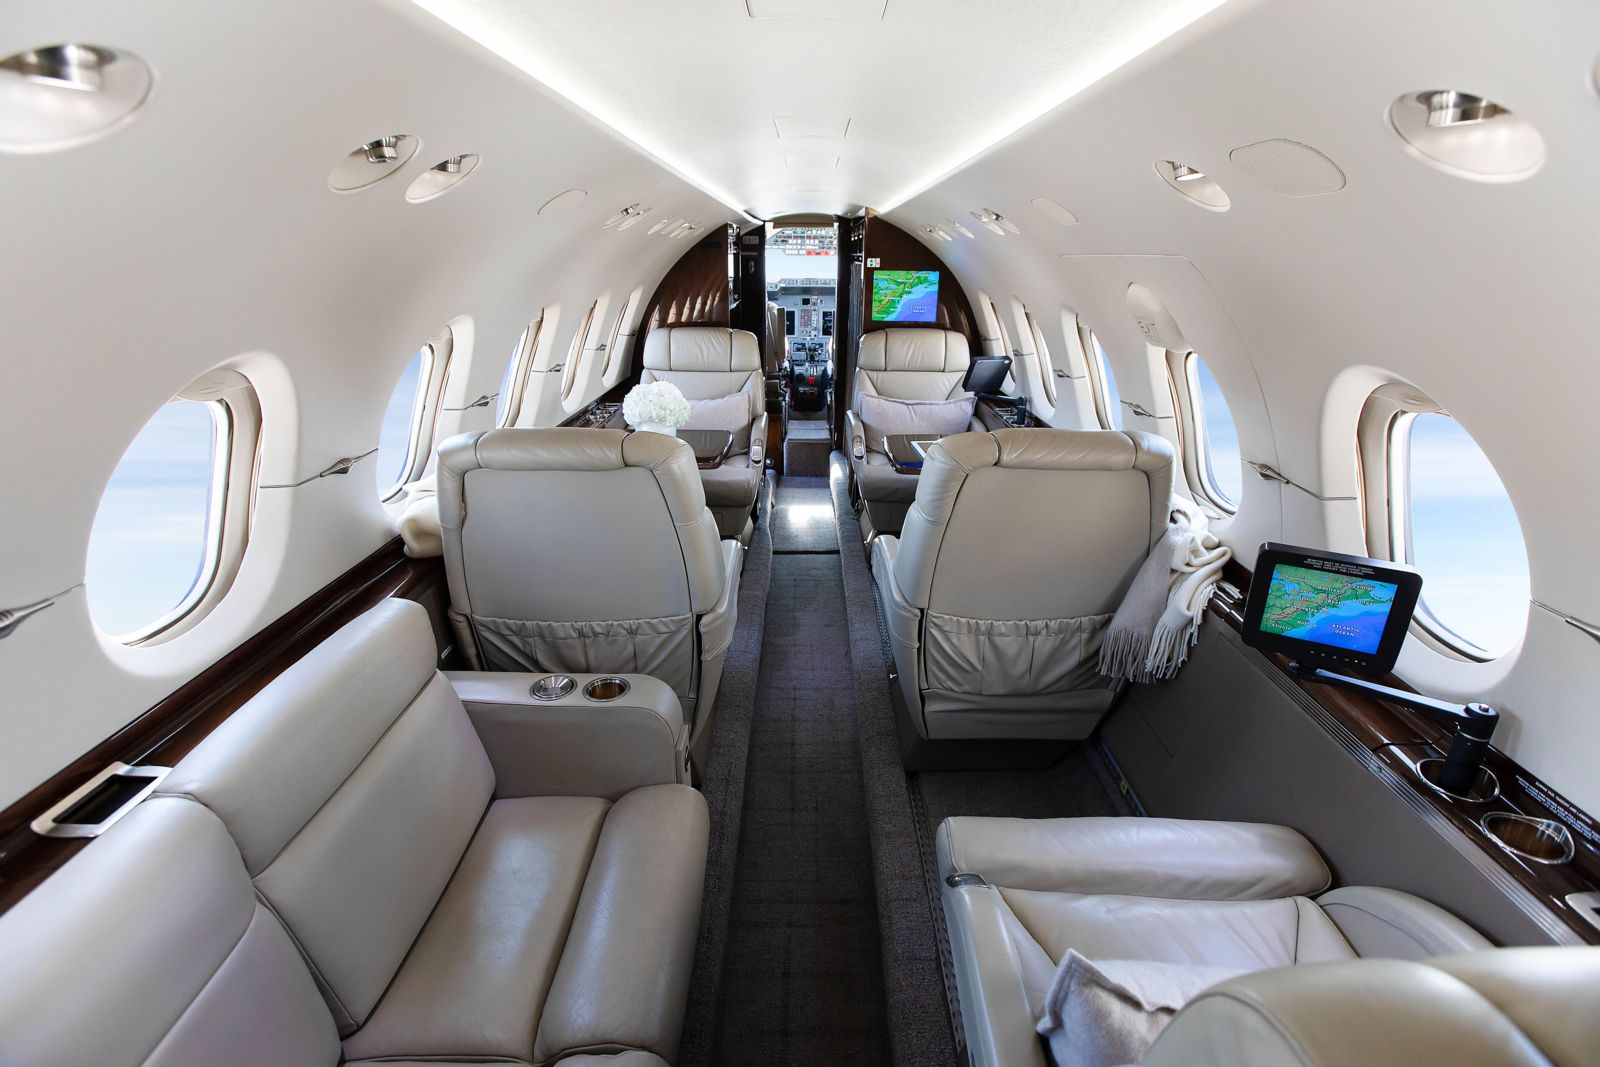 Hawker/Textron 900XP  S/N HA-0031 for sale | gallery image: /userfiles/images/Hawker900XP_sn31/n848tx%20int%204.jpg